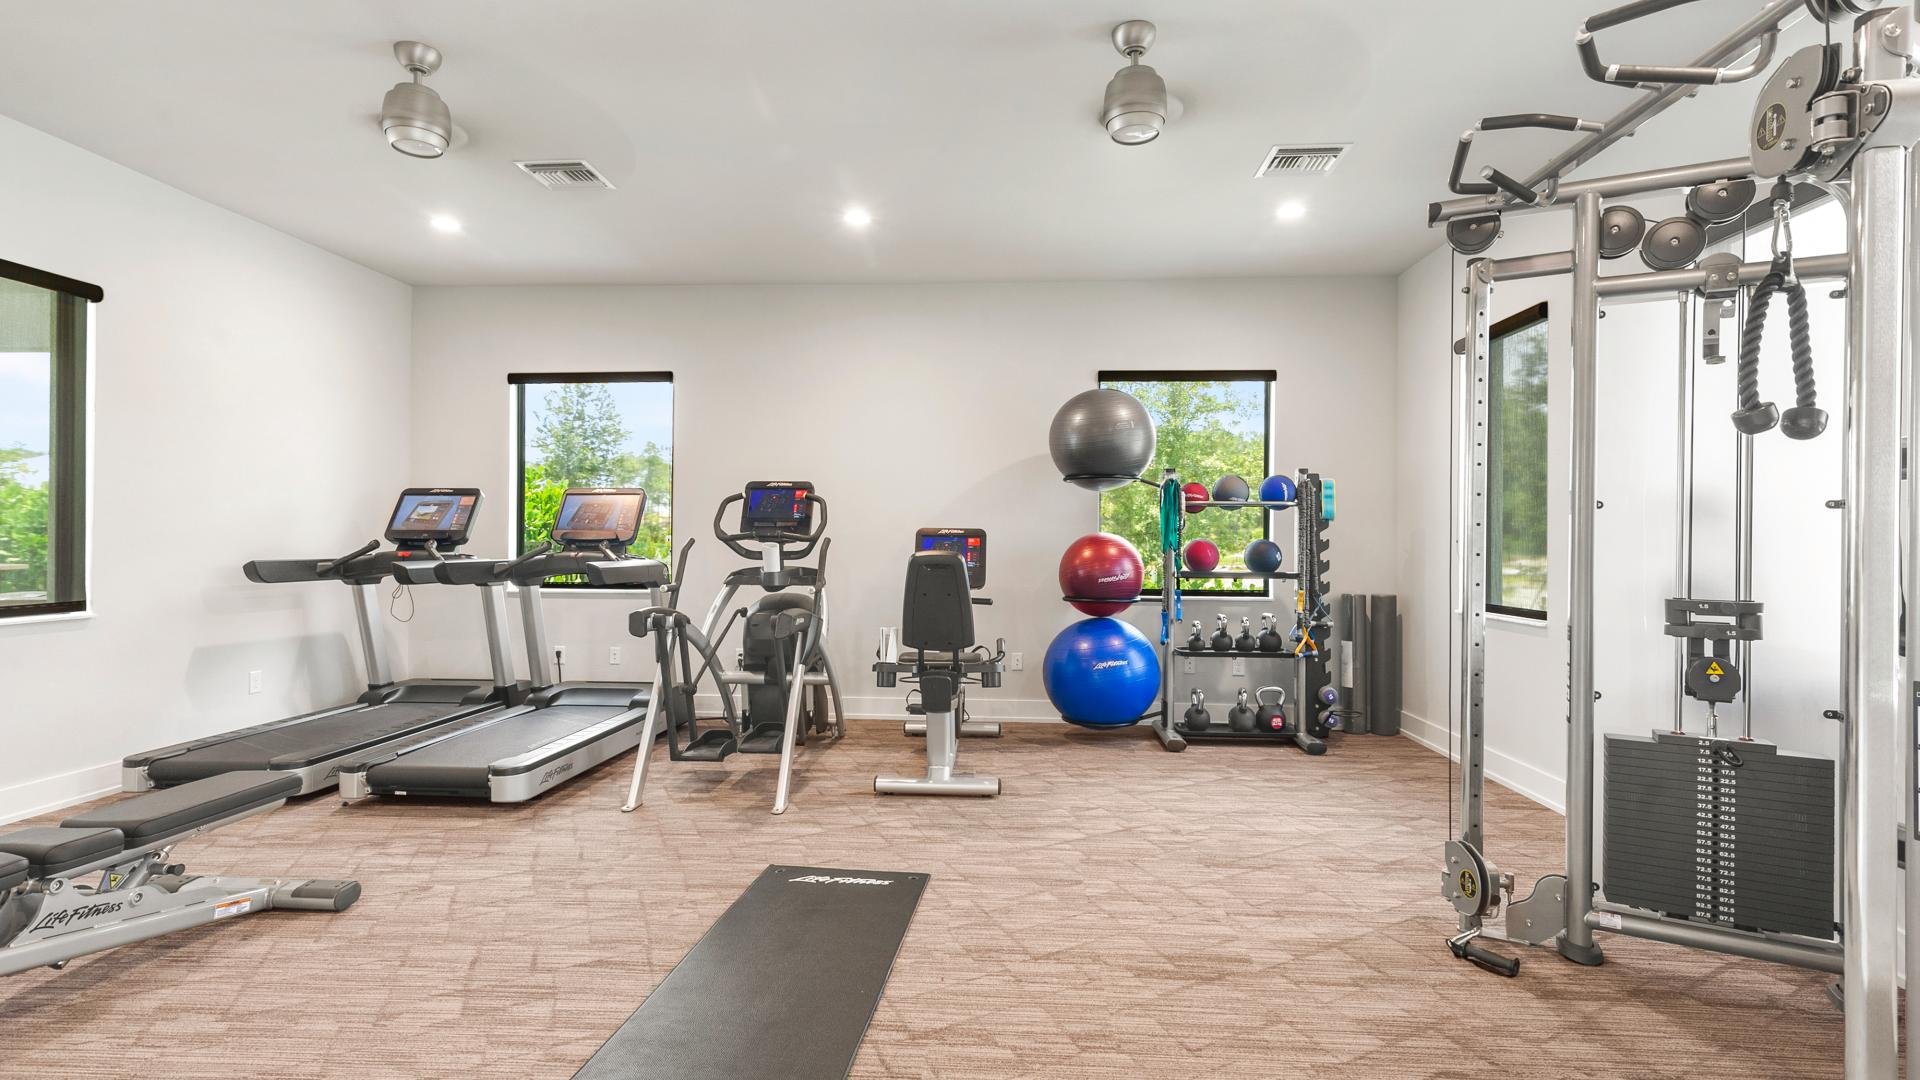 Abaco-Pointe-clubhouse-fitness-center.jpeg